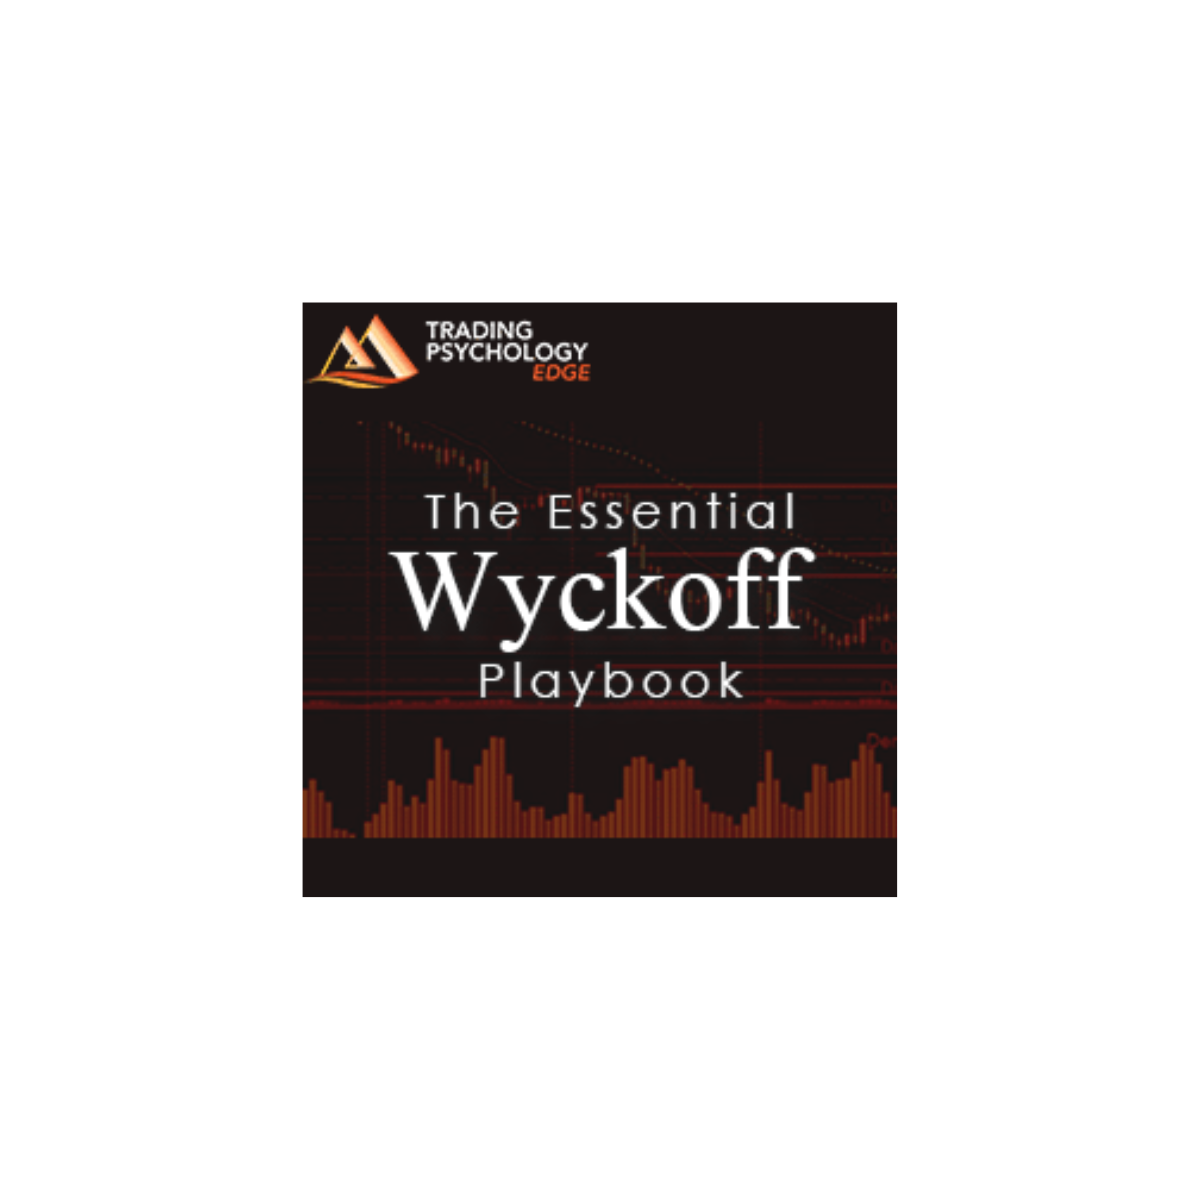 You are currently viewing Wyckoffanalytics – The Essential Wyckoff Playbook